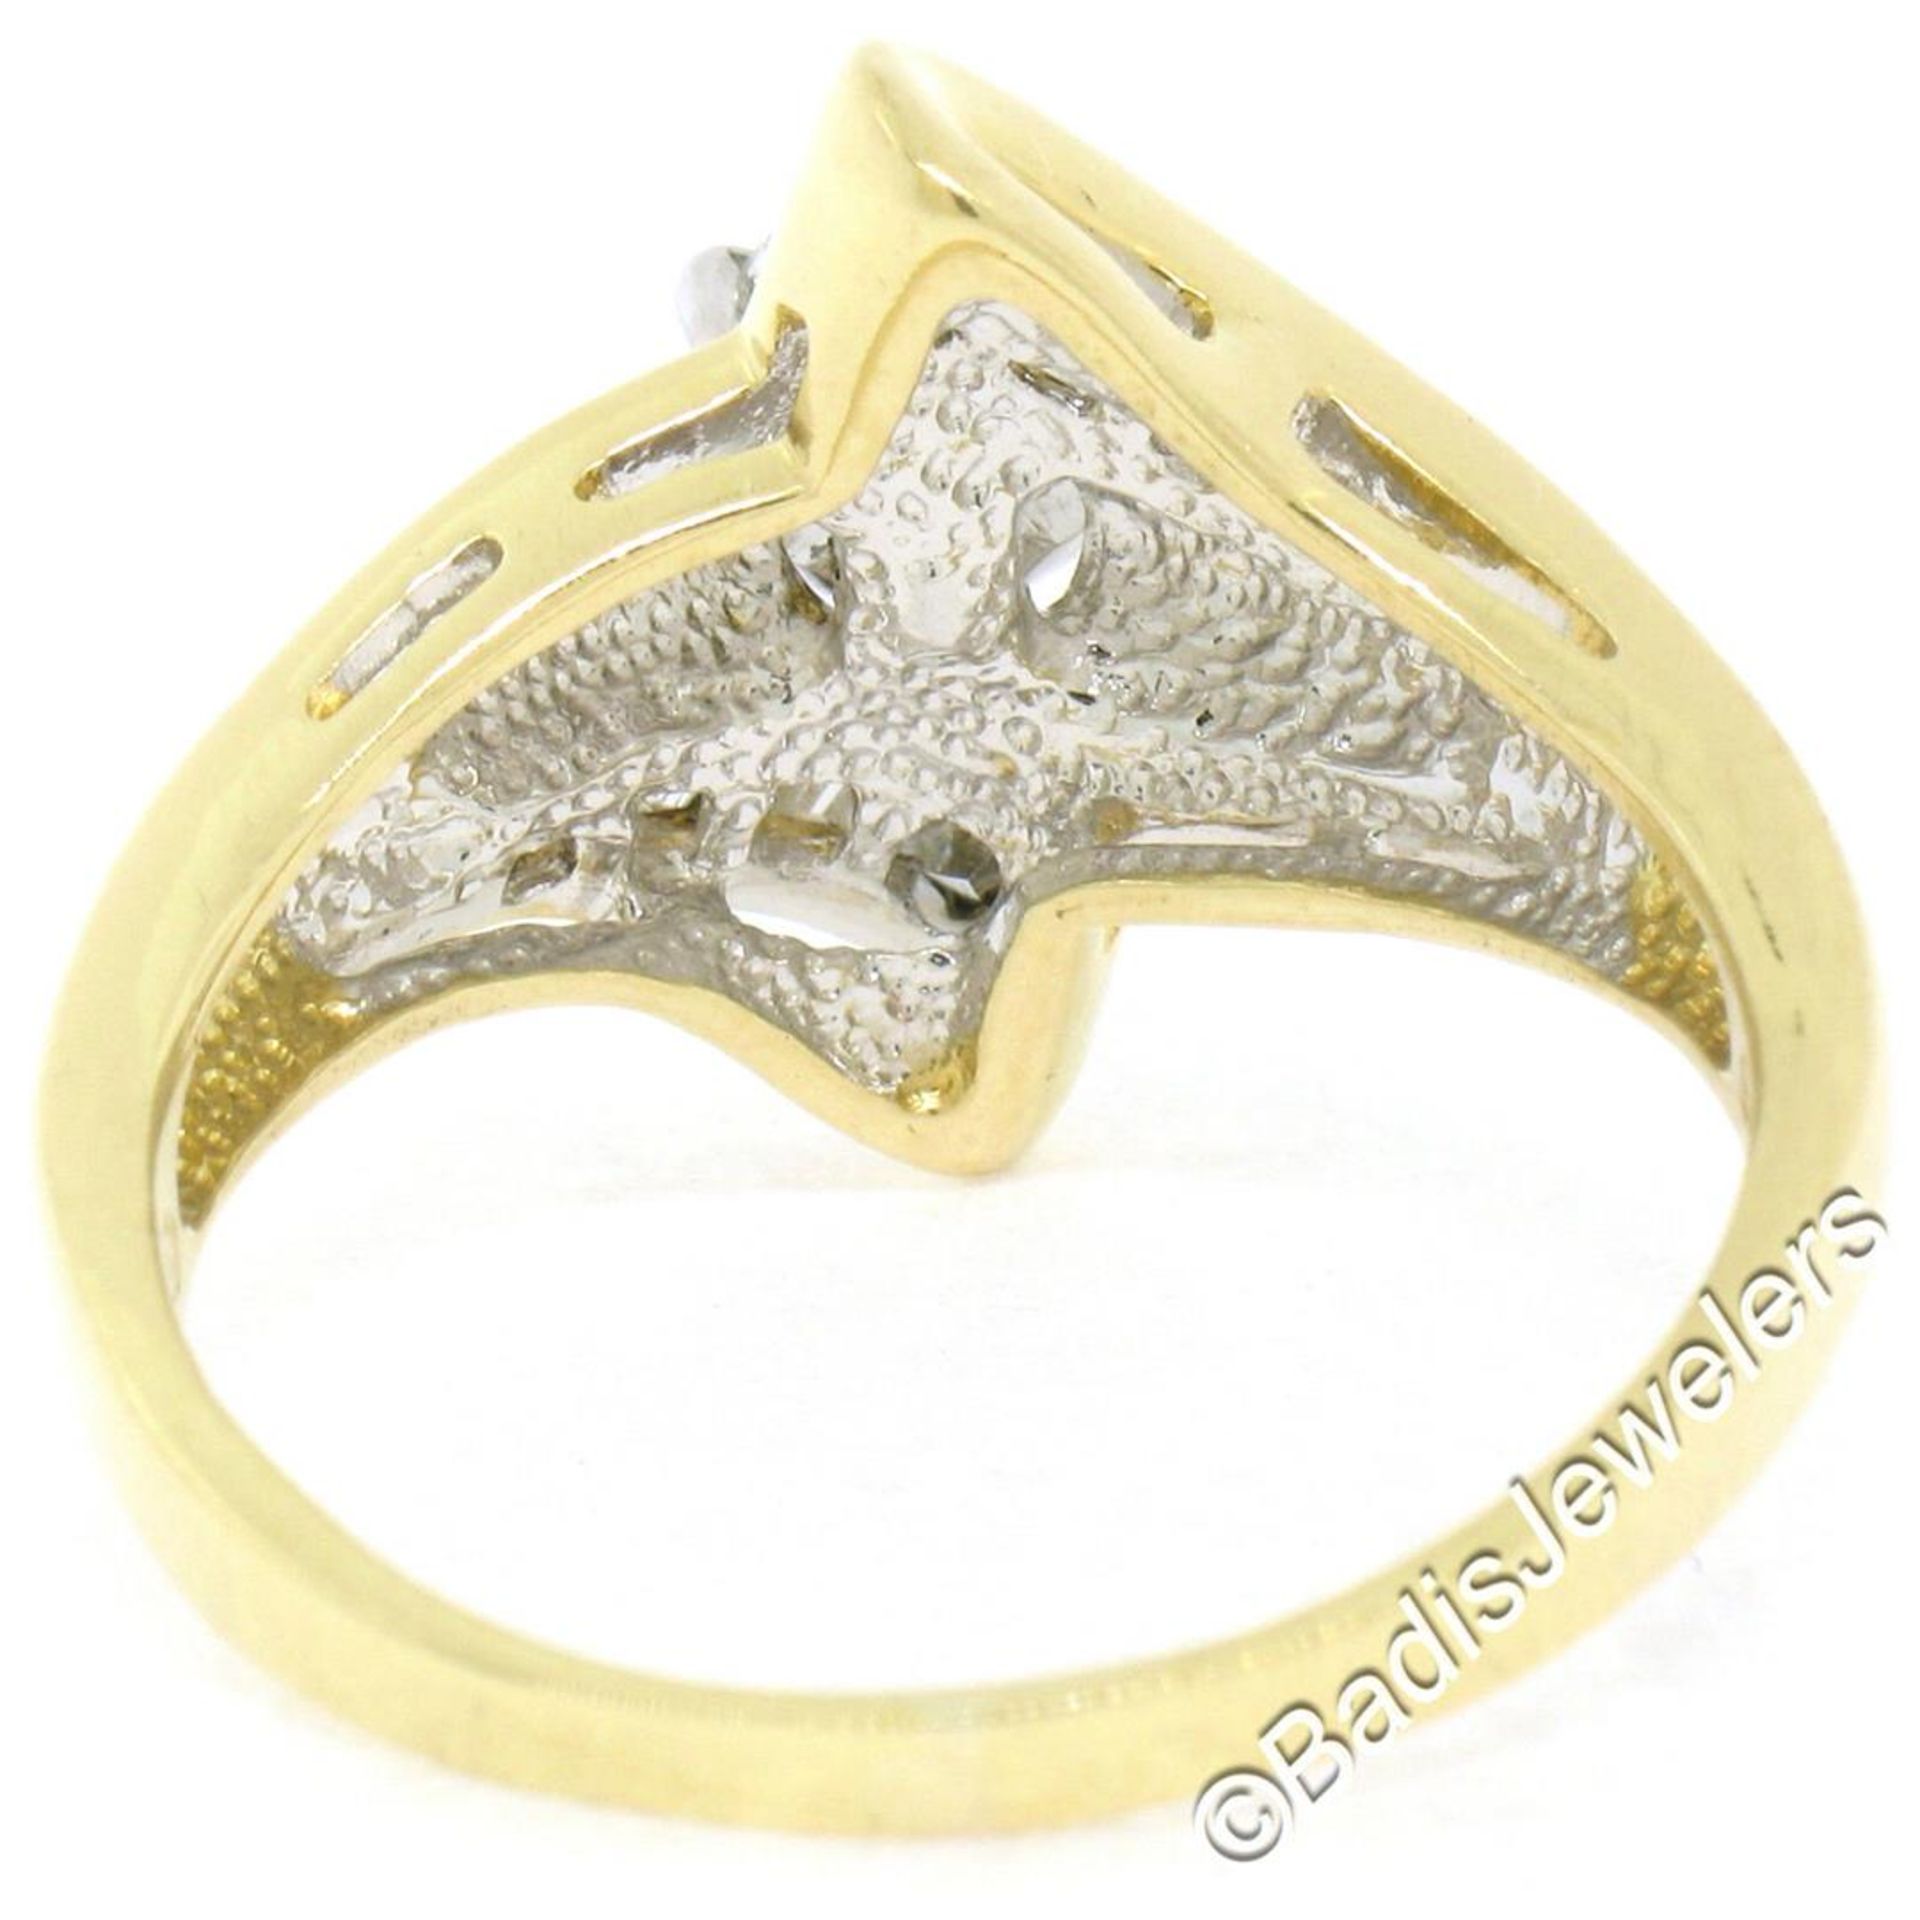 18kt Yellow and White Gold 0.90ctw Round and Baguette Diamond Ring - Image 7 of 8